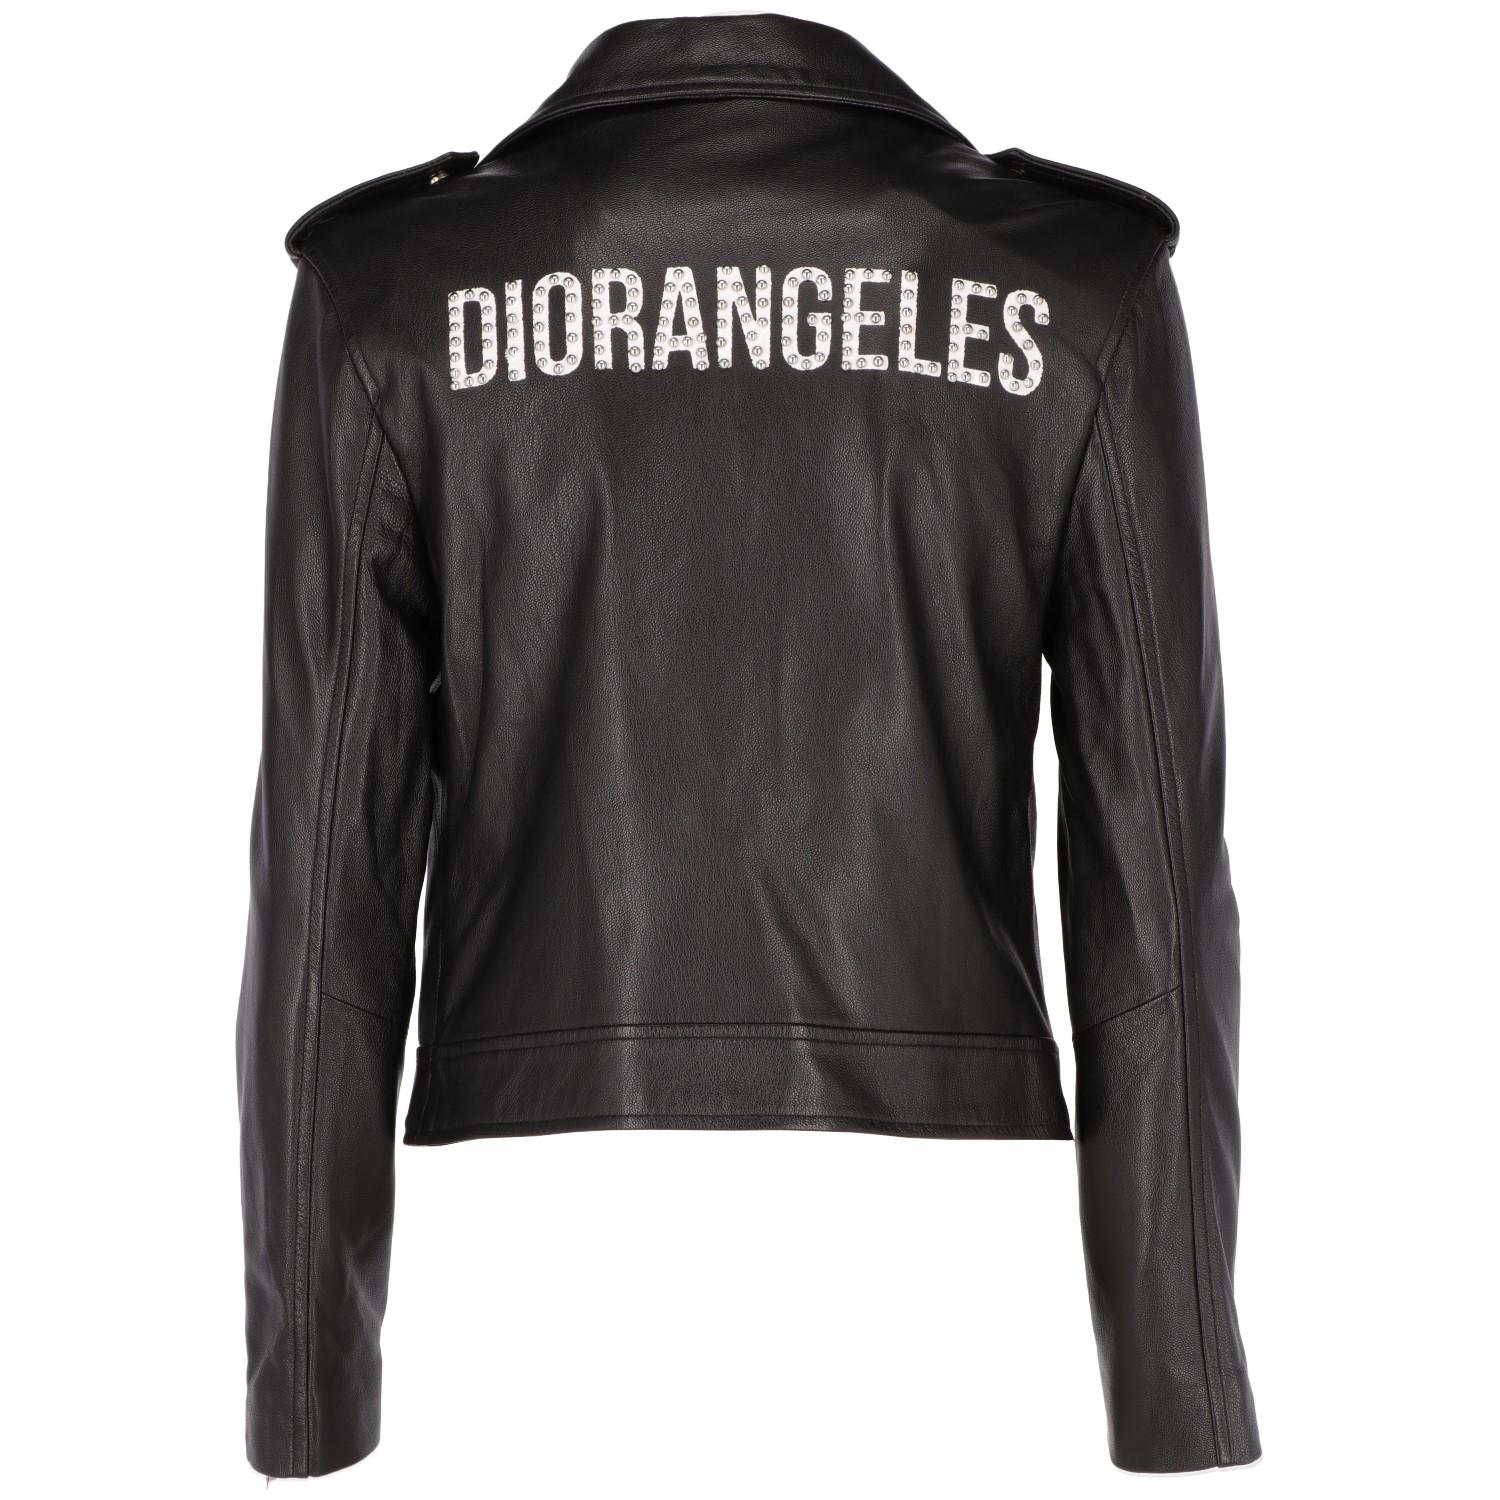 Christian Dior black leather biker jacket. In 100% lamb leather and black lining, the stylish Dior jacket features press buttons with 